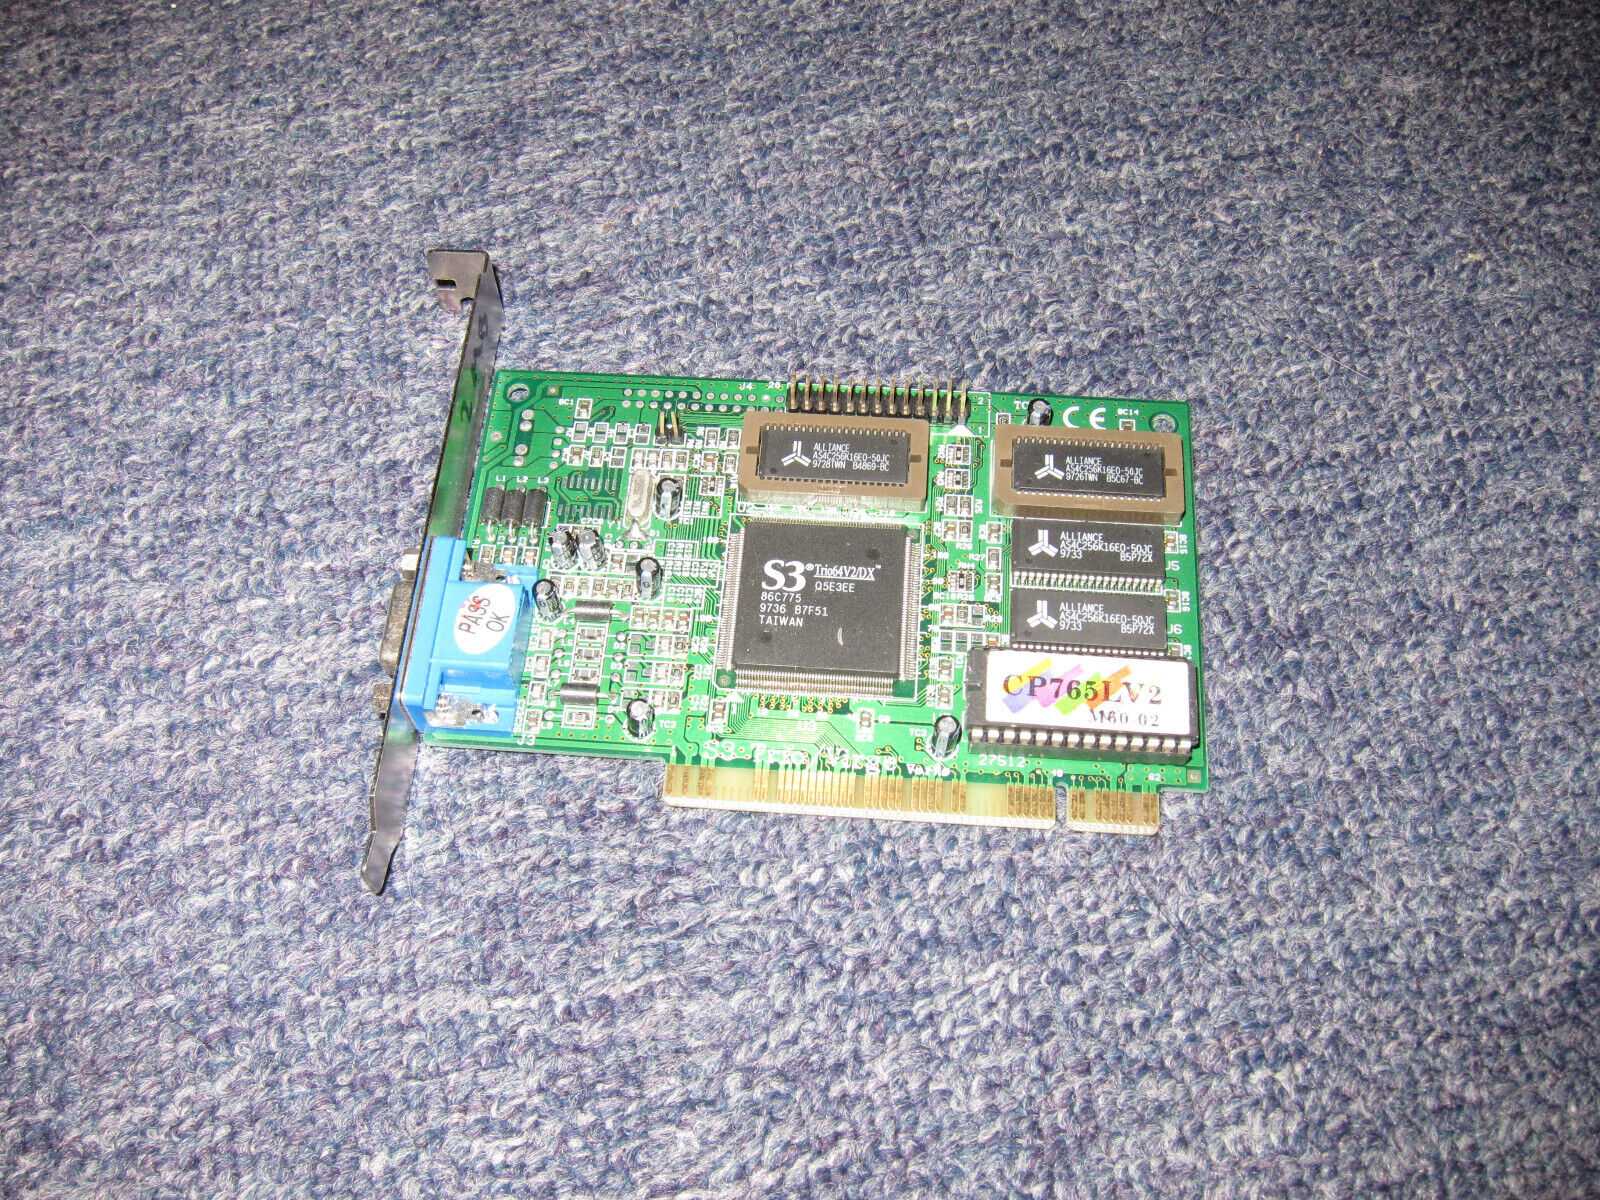 DataExpert CP765LV2 PCI Graphics Card (S3 Trio64V2/DX, 86C775, 2MB, 1997)